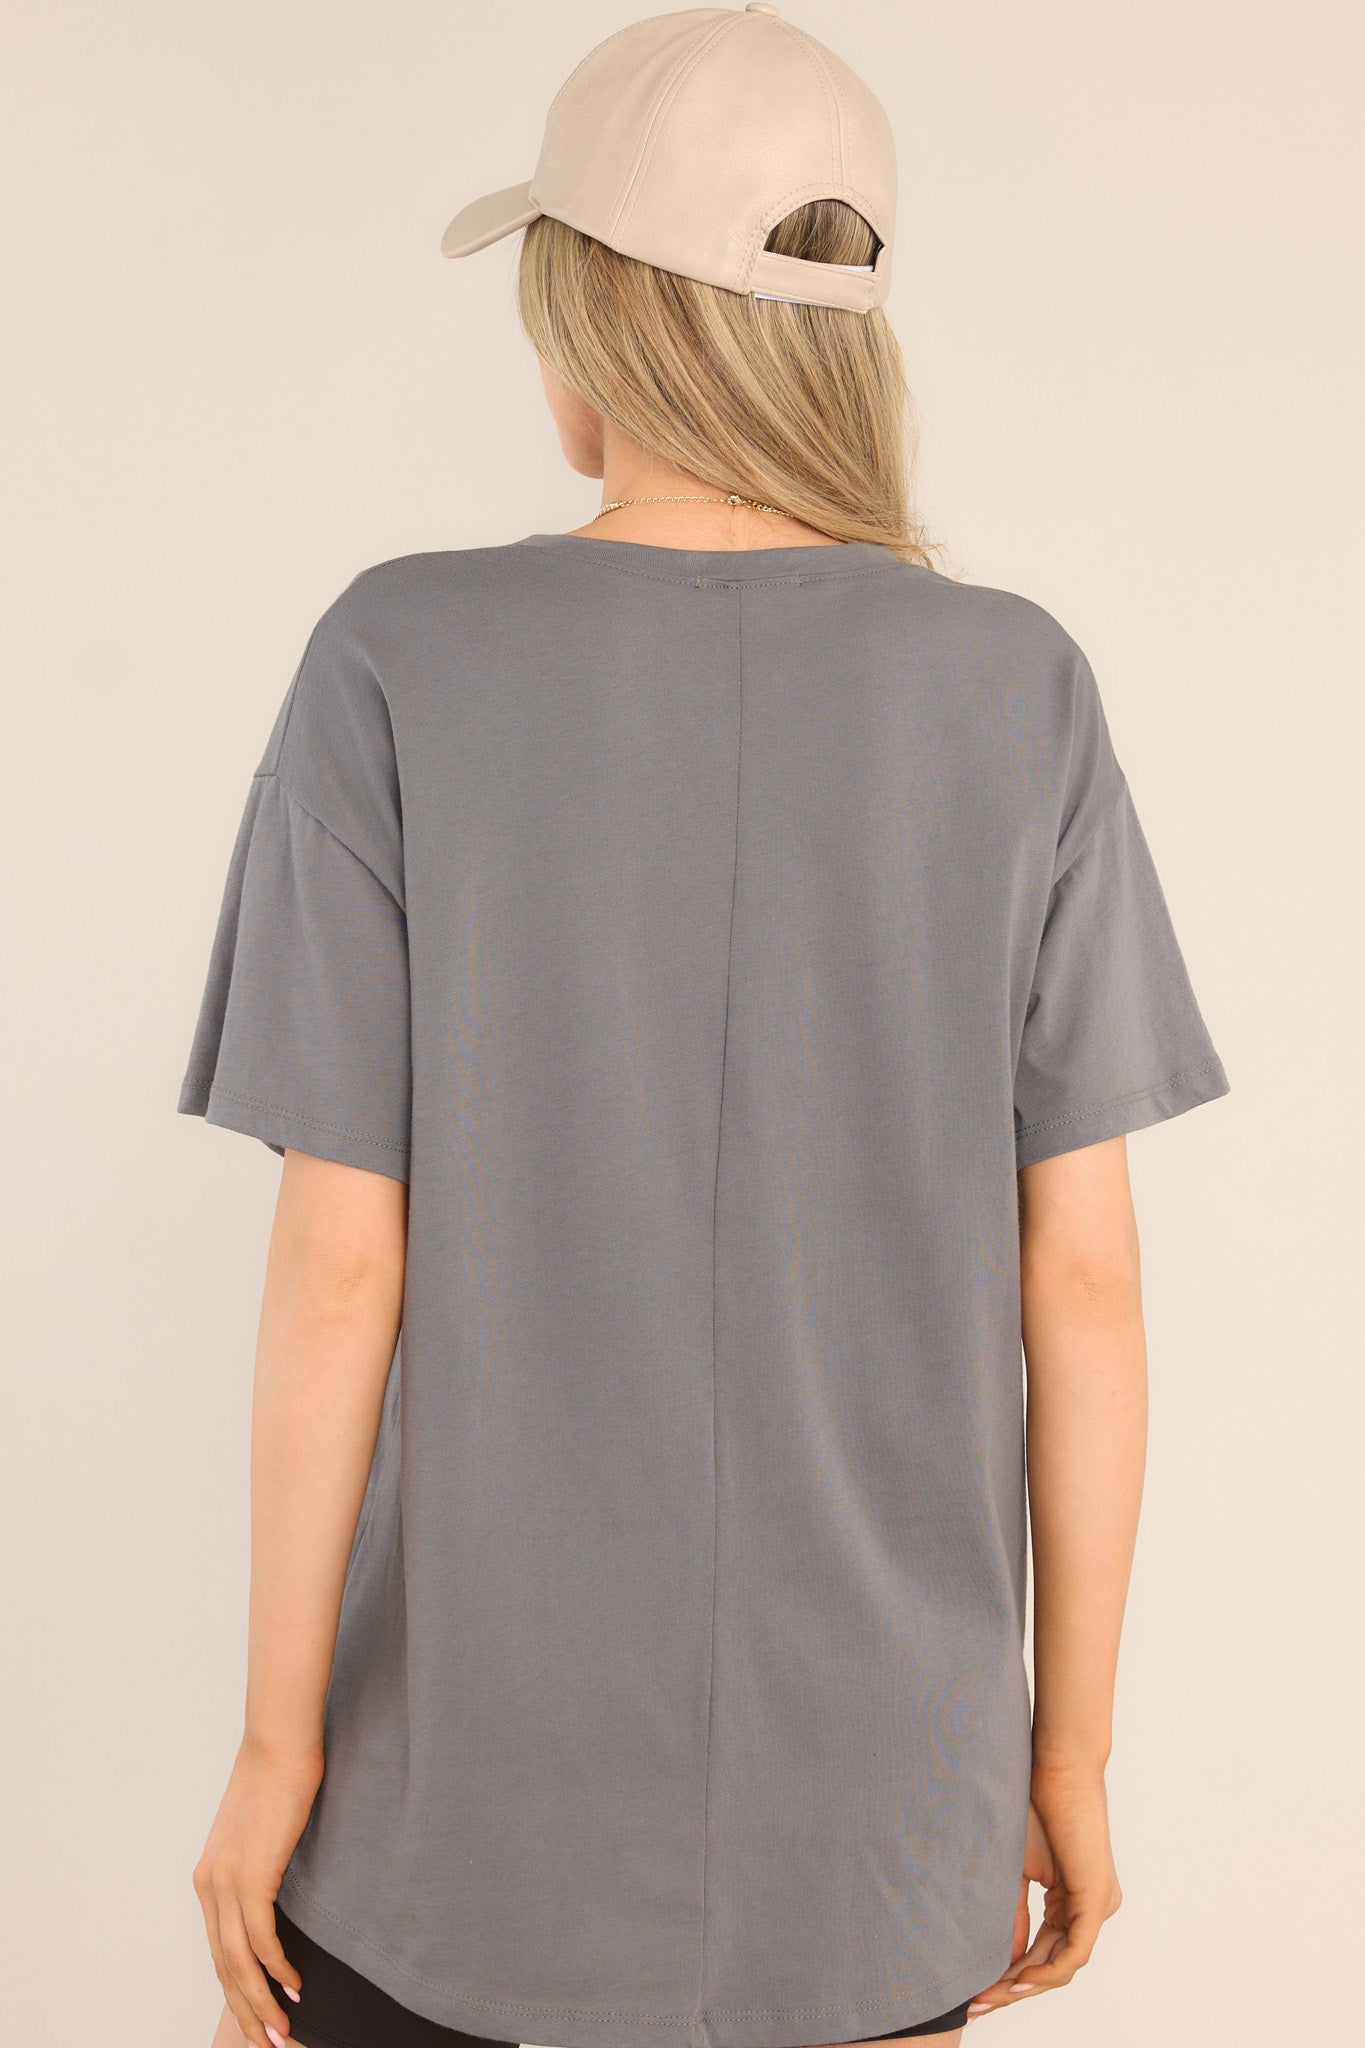 Back view of this top that features a crew neckline, dropped shoulders, center seam down the back and short sleeves.